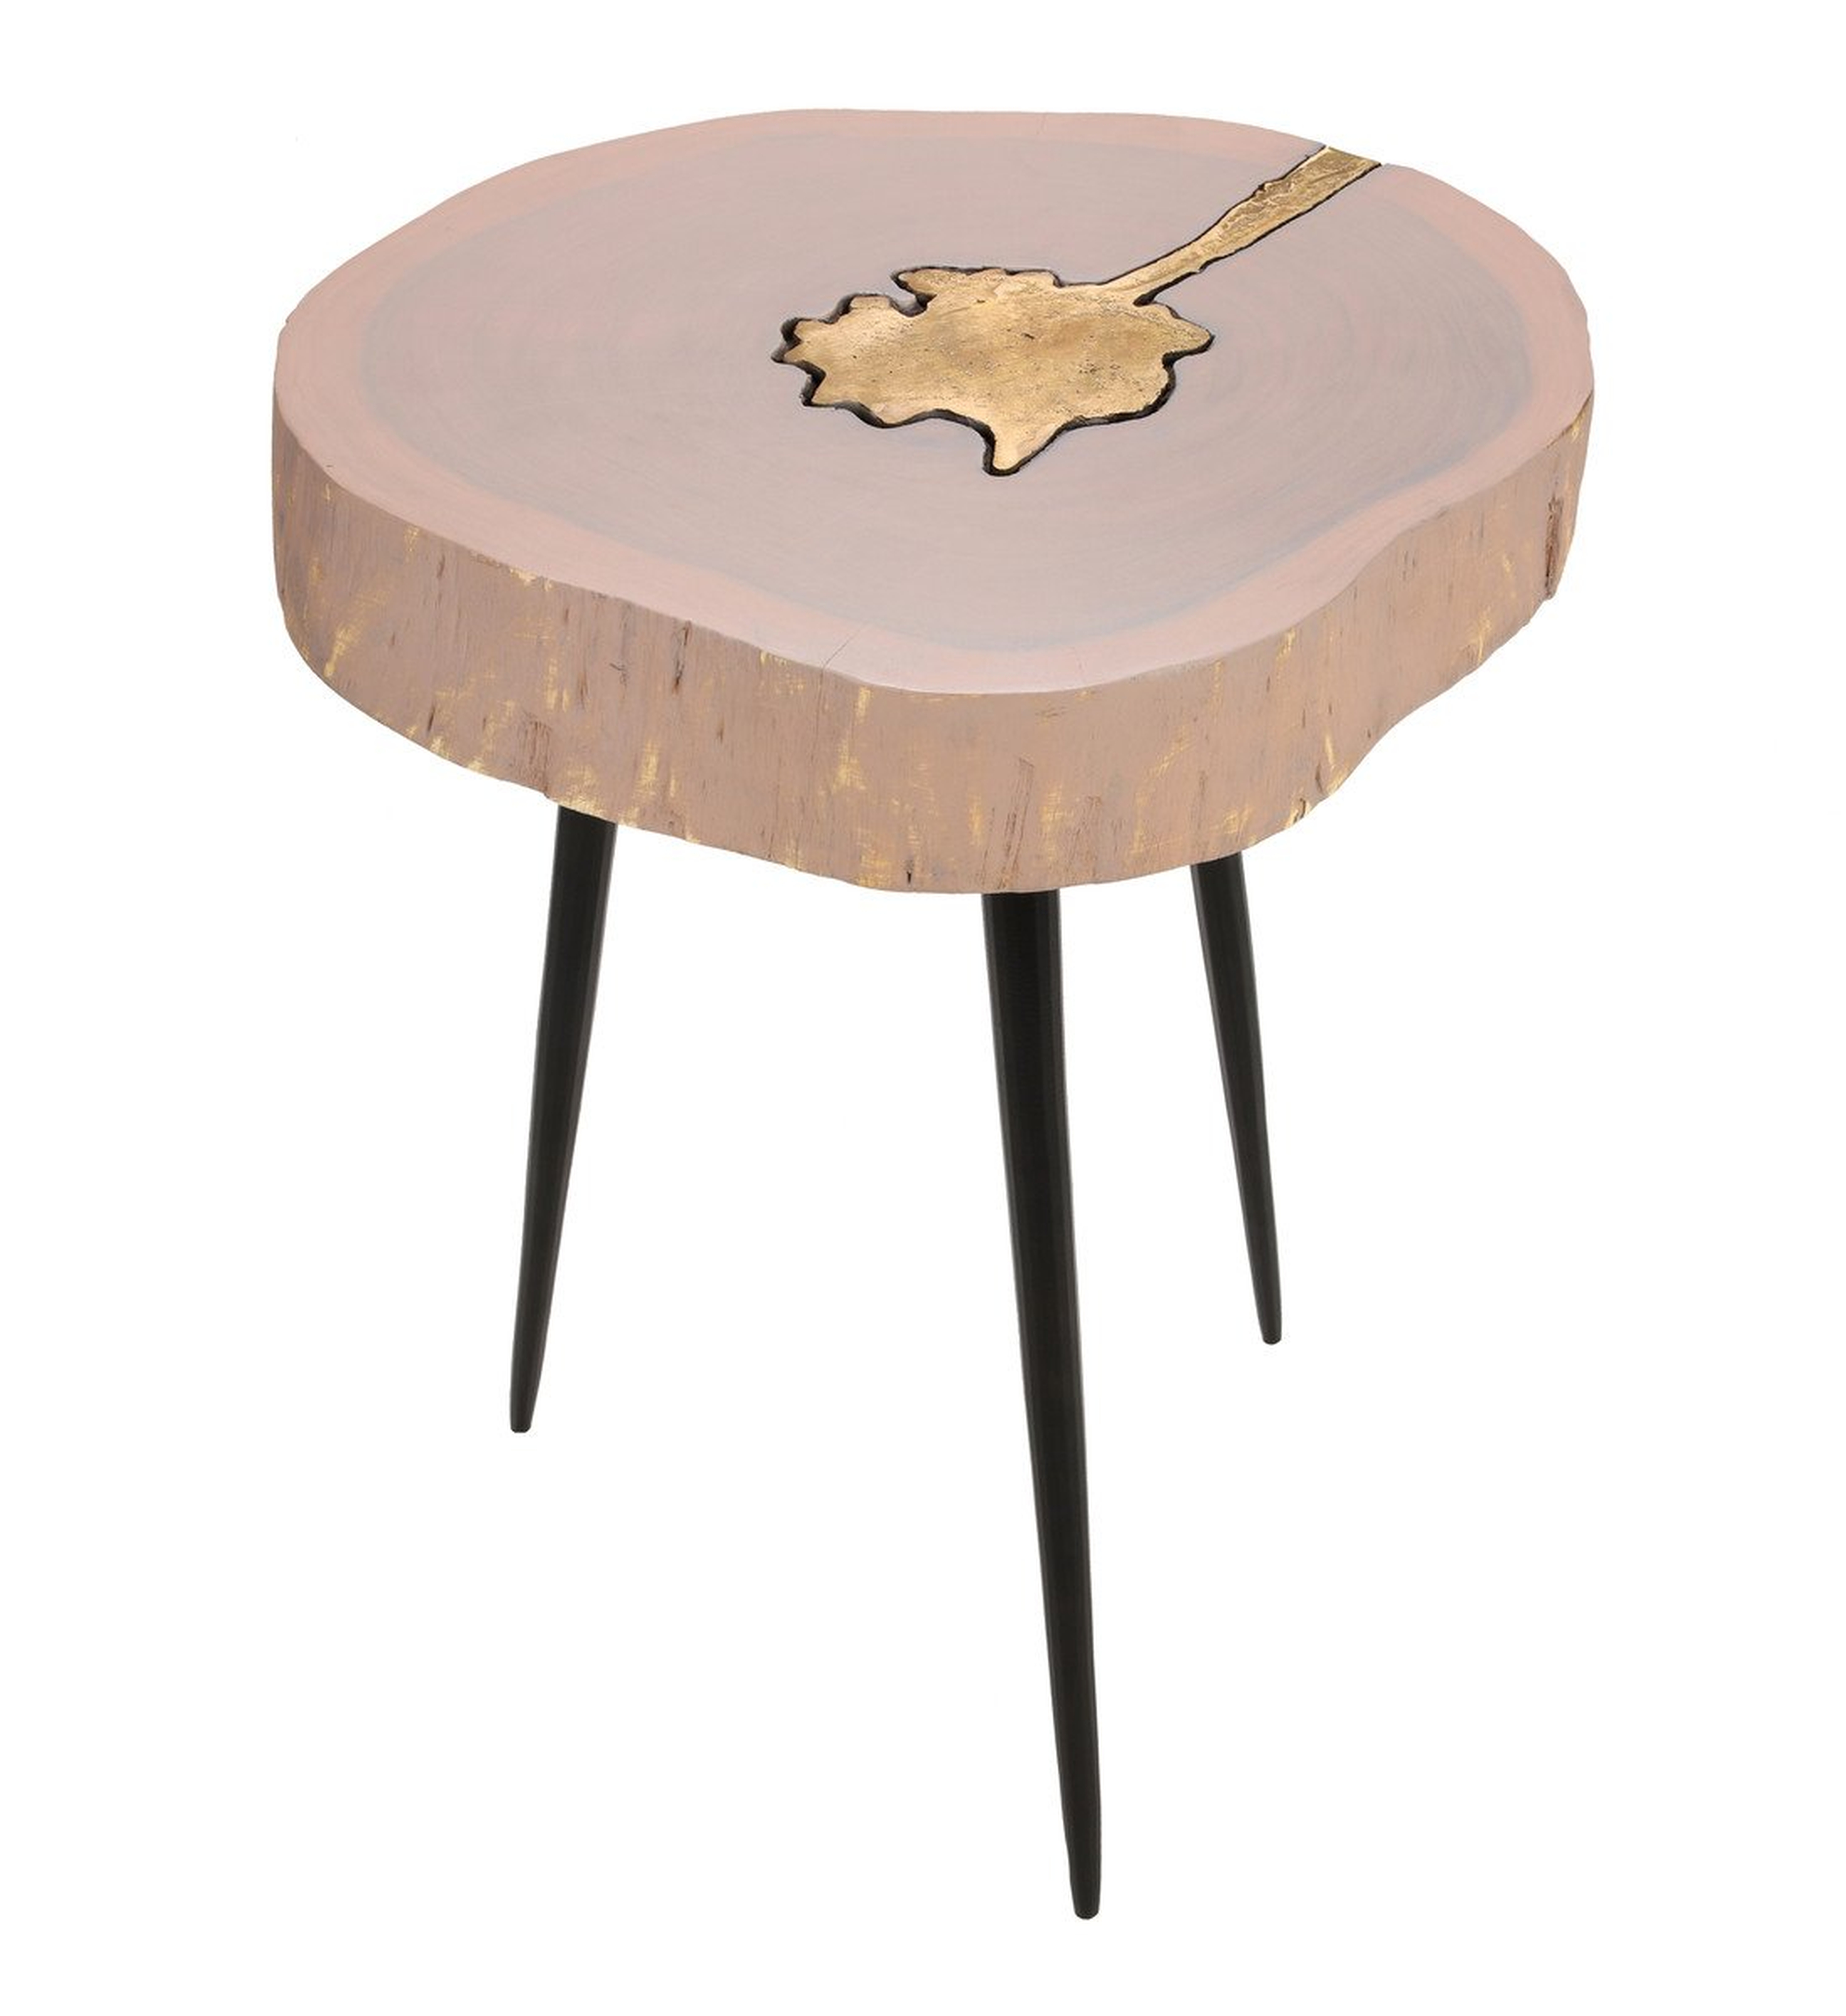 Kenzie Jane and Brass Side Table - Maren Home